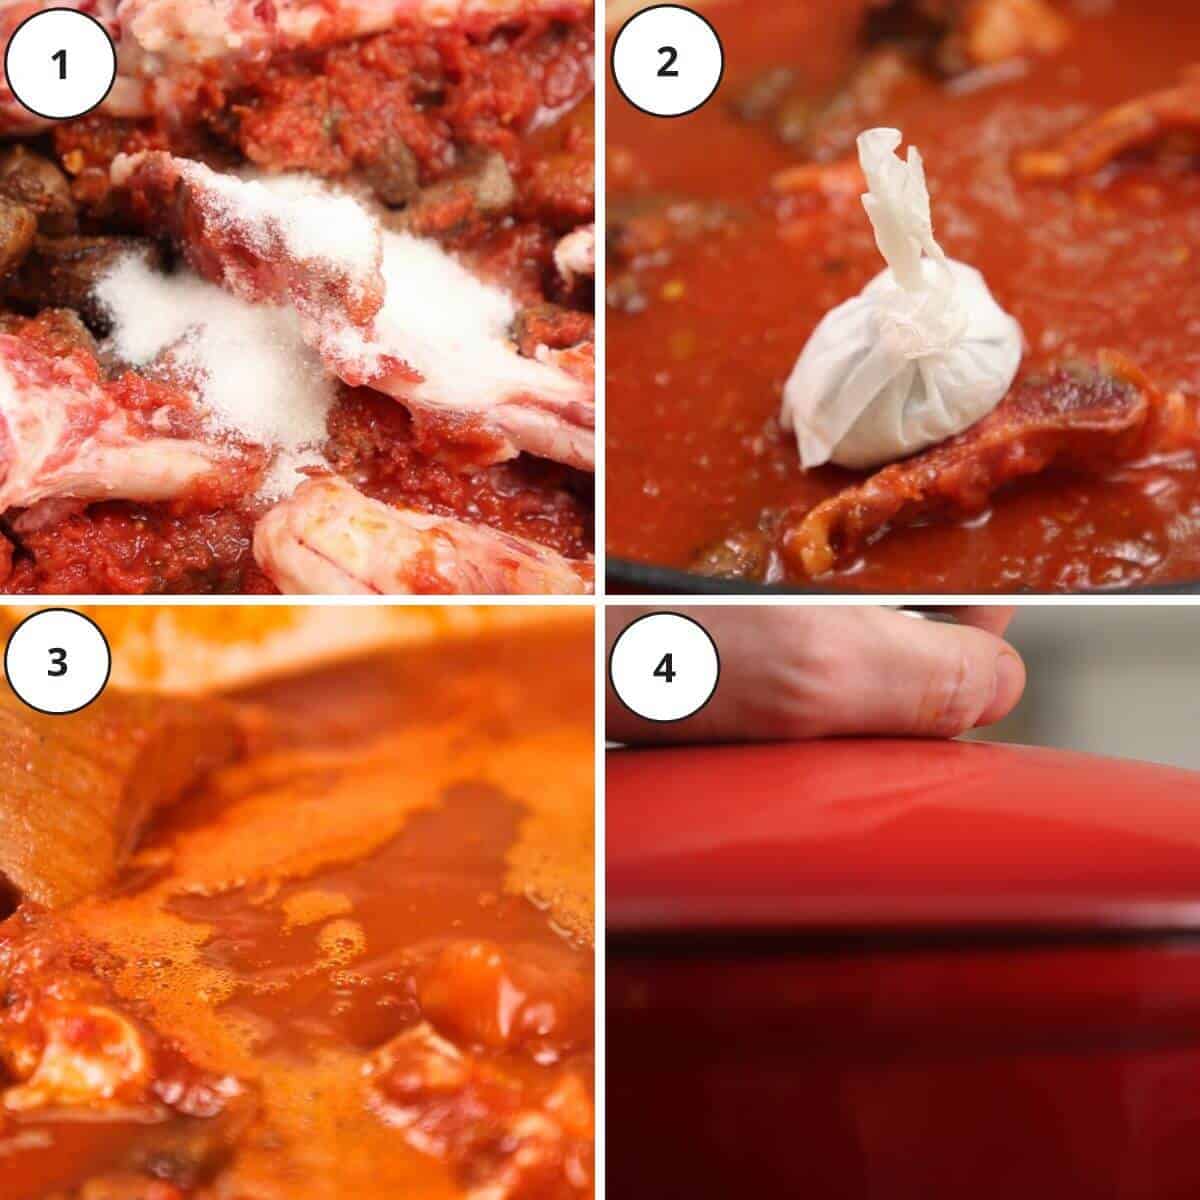 Picture steps 5 to 8 for making tomato bredie.